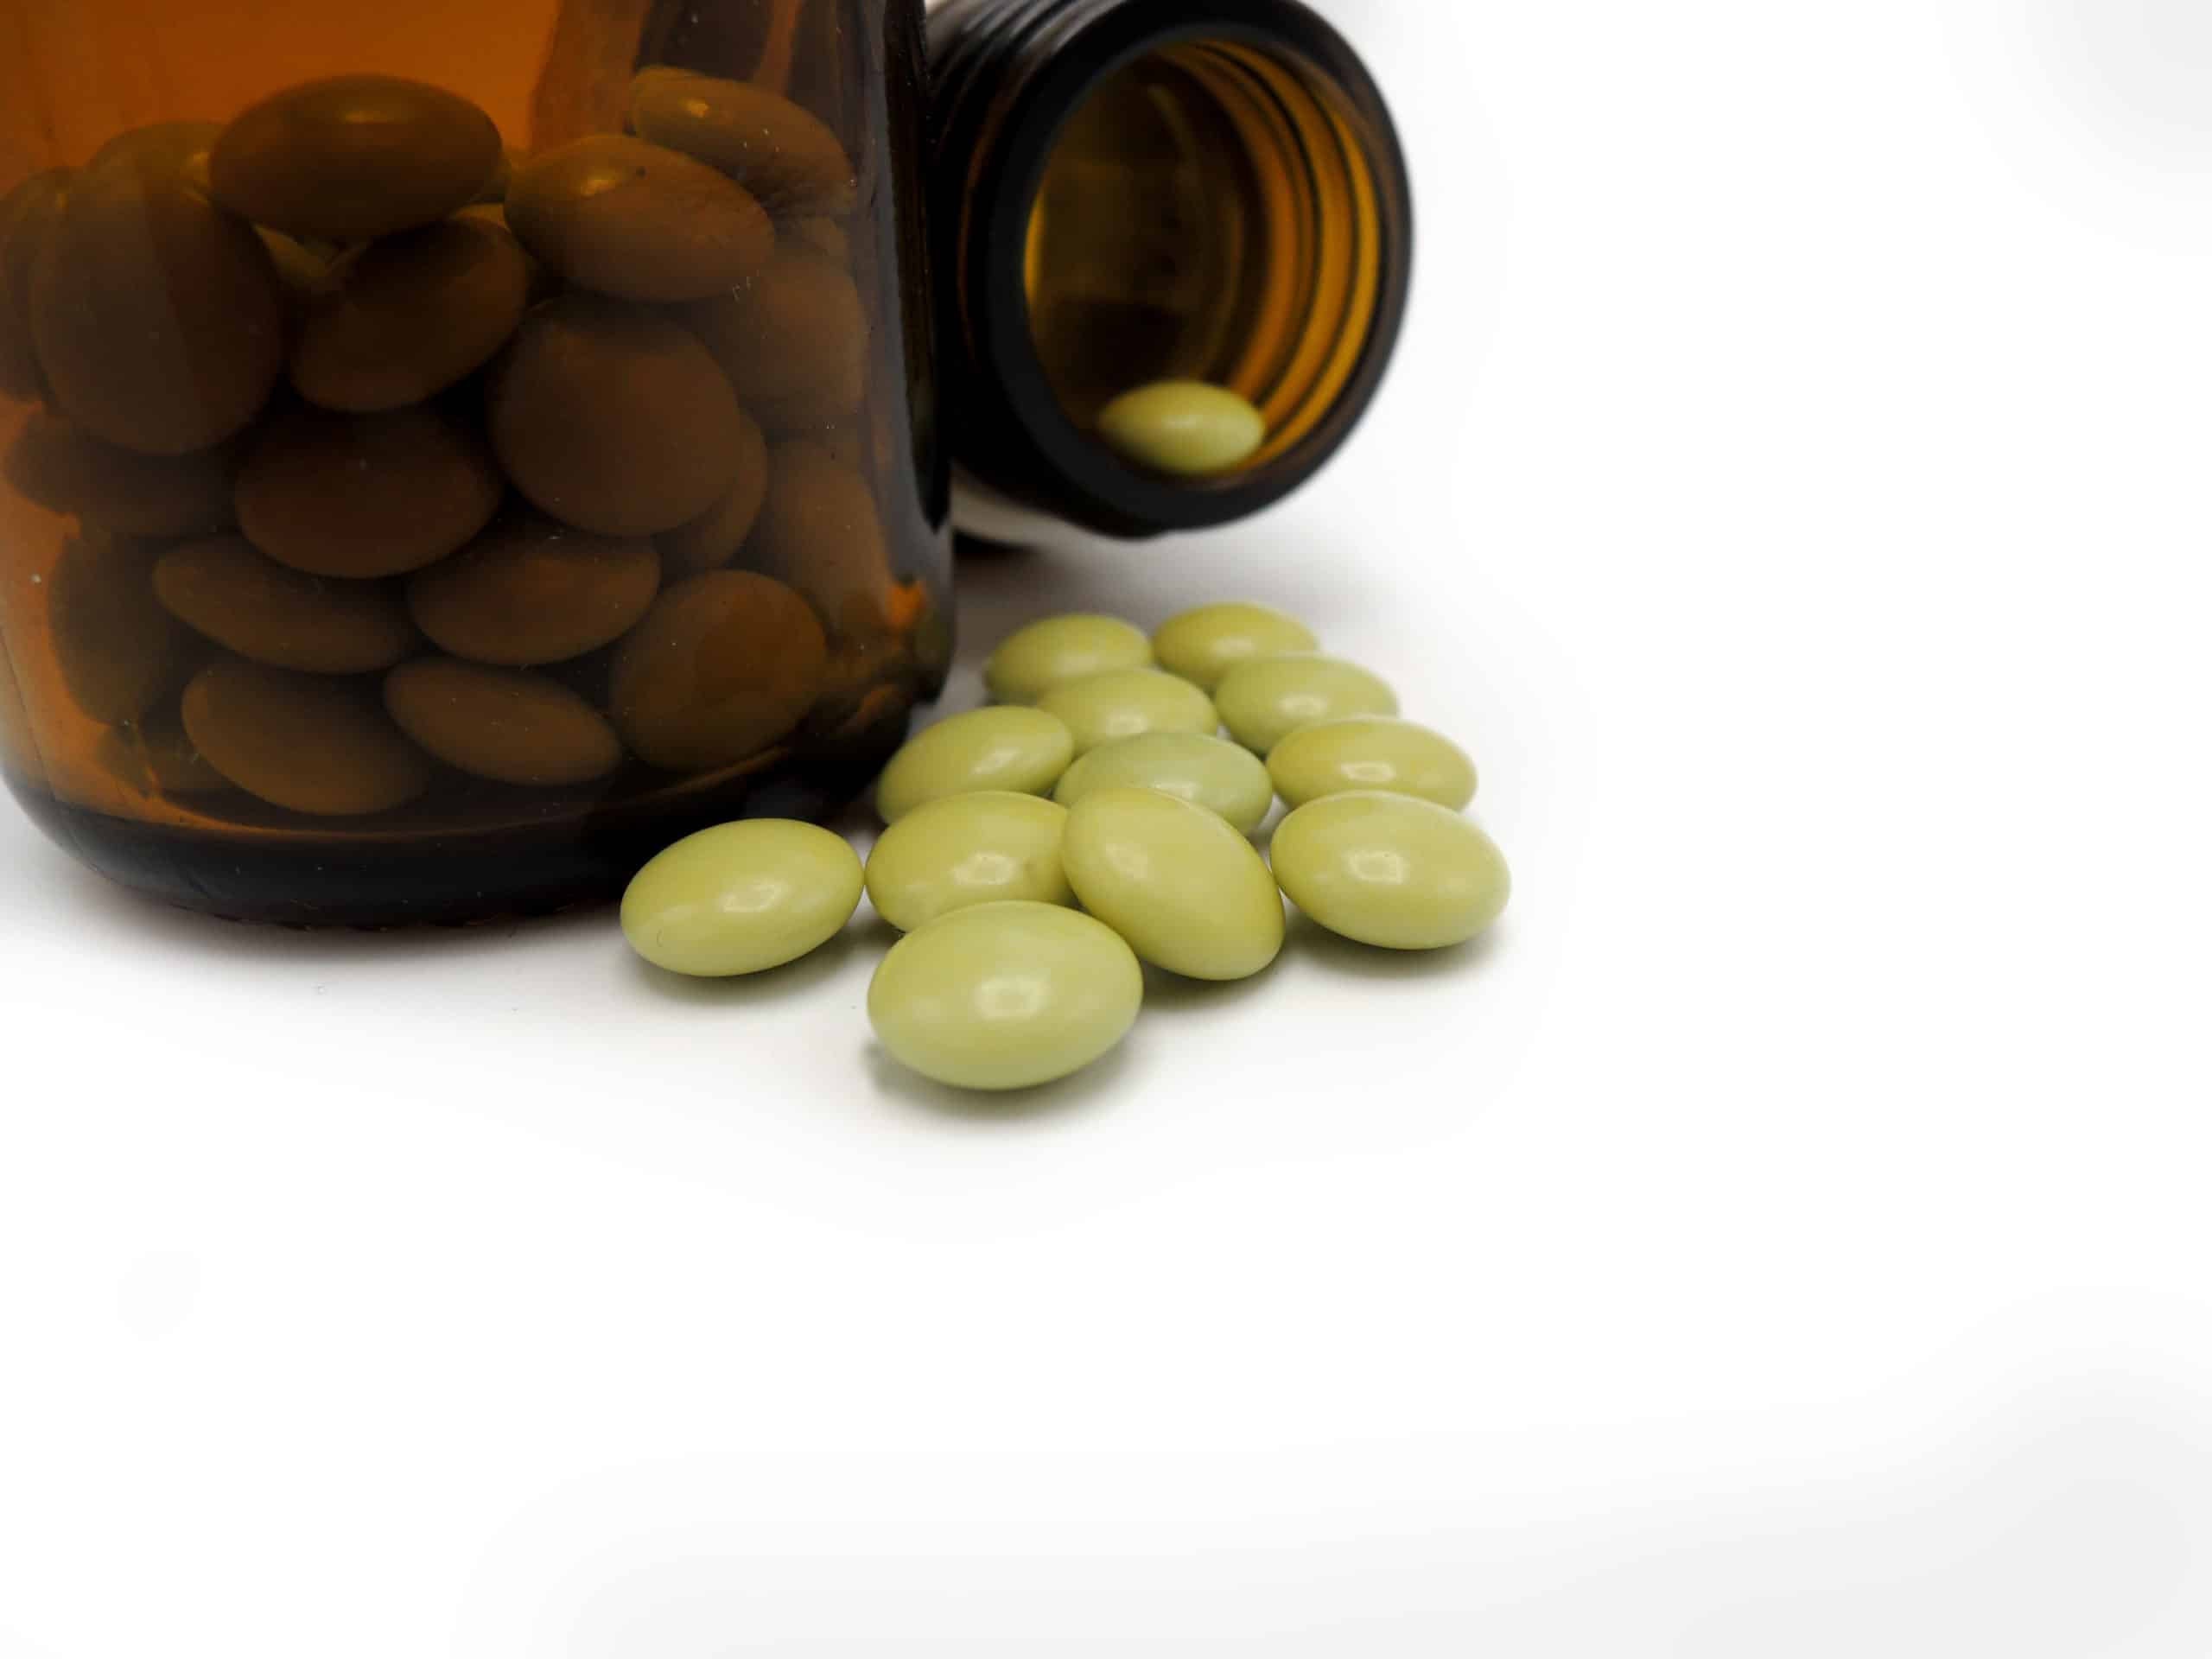 An Opened Bottle Of Green Tablets Of Chlordiazepoxide And Clindinium which causes Benzo Abuse